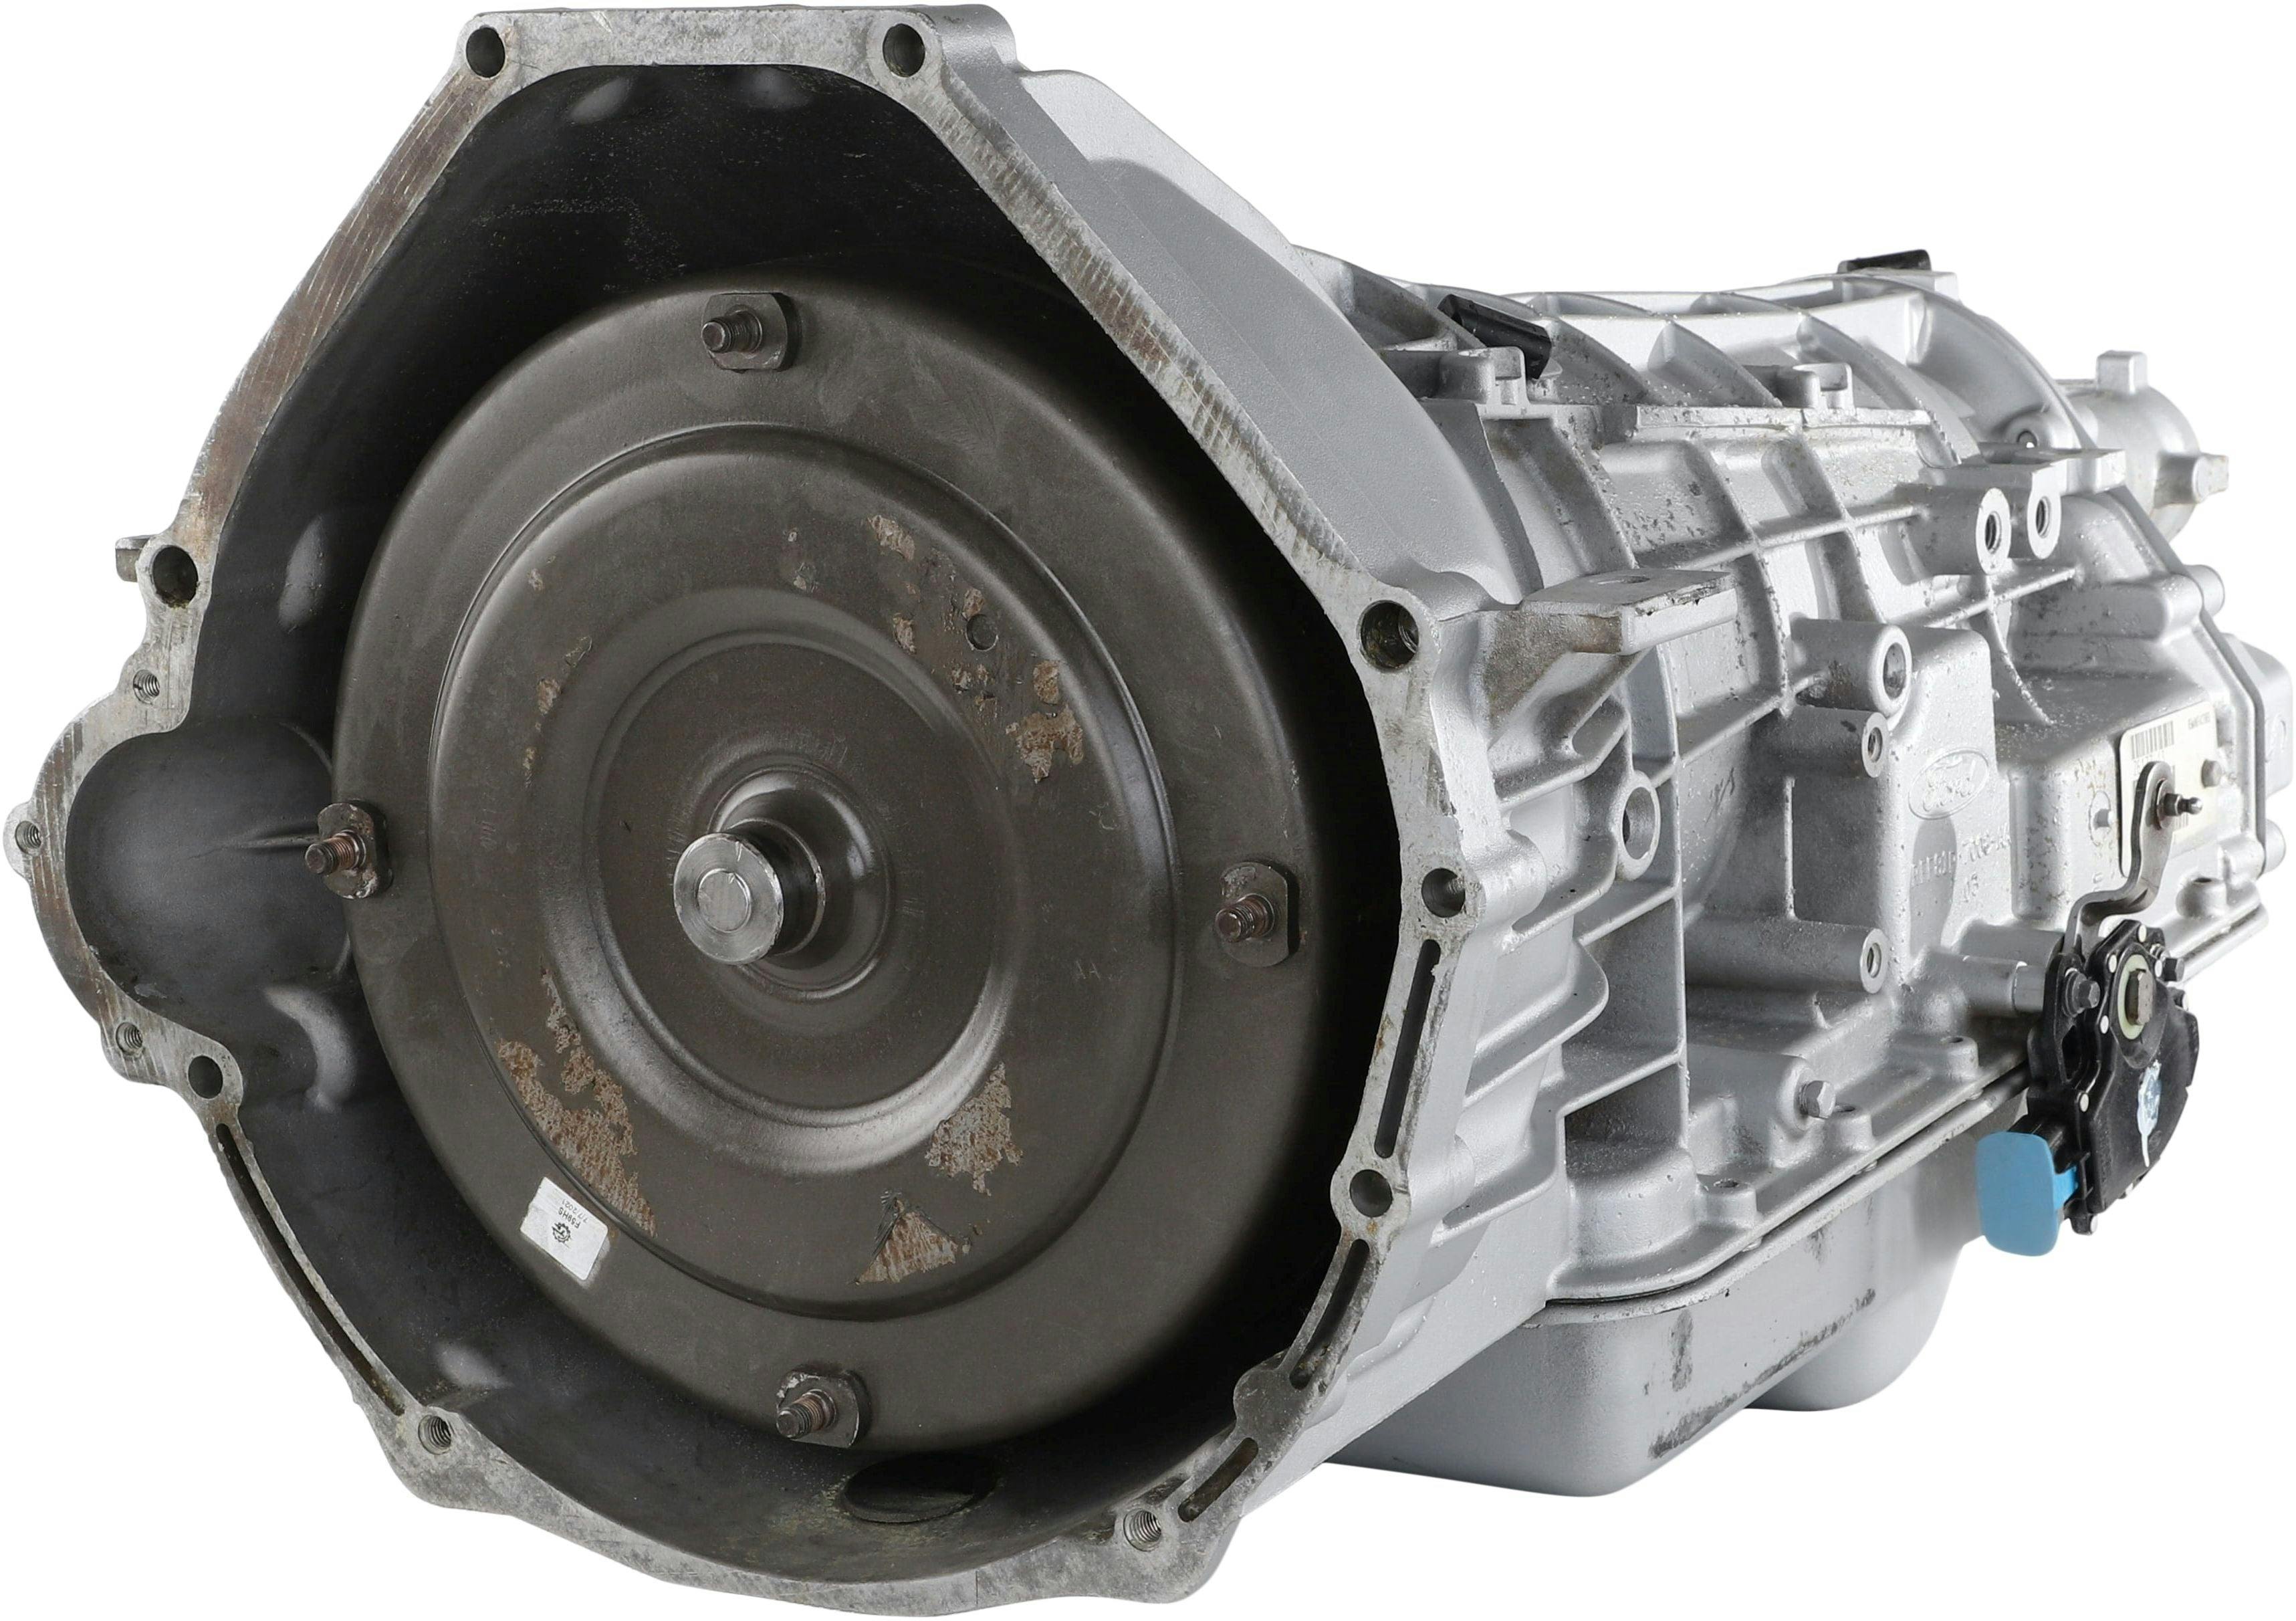 Automatic Transmission for 1999-2005 Ford E-150, 250, 350 Econoline/Club Wagon, E-350, 450 Super Duty/Econoline/Excursion/Expedition/F-150, Heritage/F-250, 350 Super Duty and Lincoln Blackwood/Navigator RWD with 5.4L V8 Engine